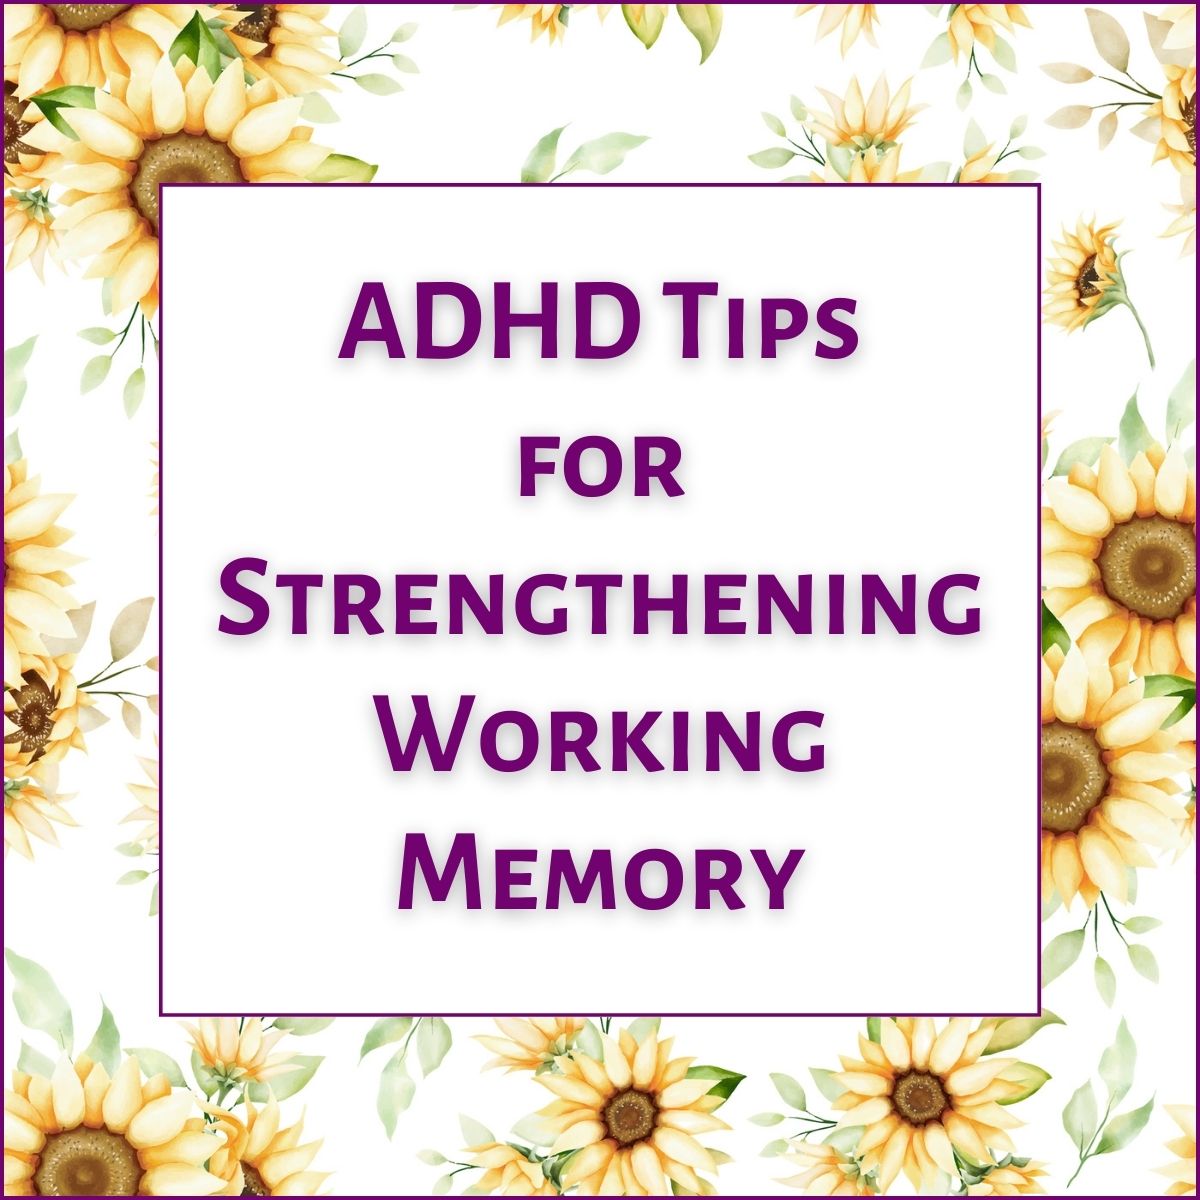 ADHD Tips for Strengthening Working Memory